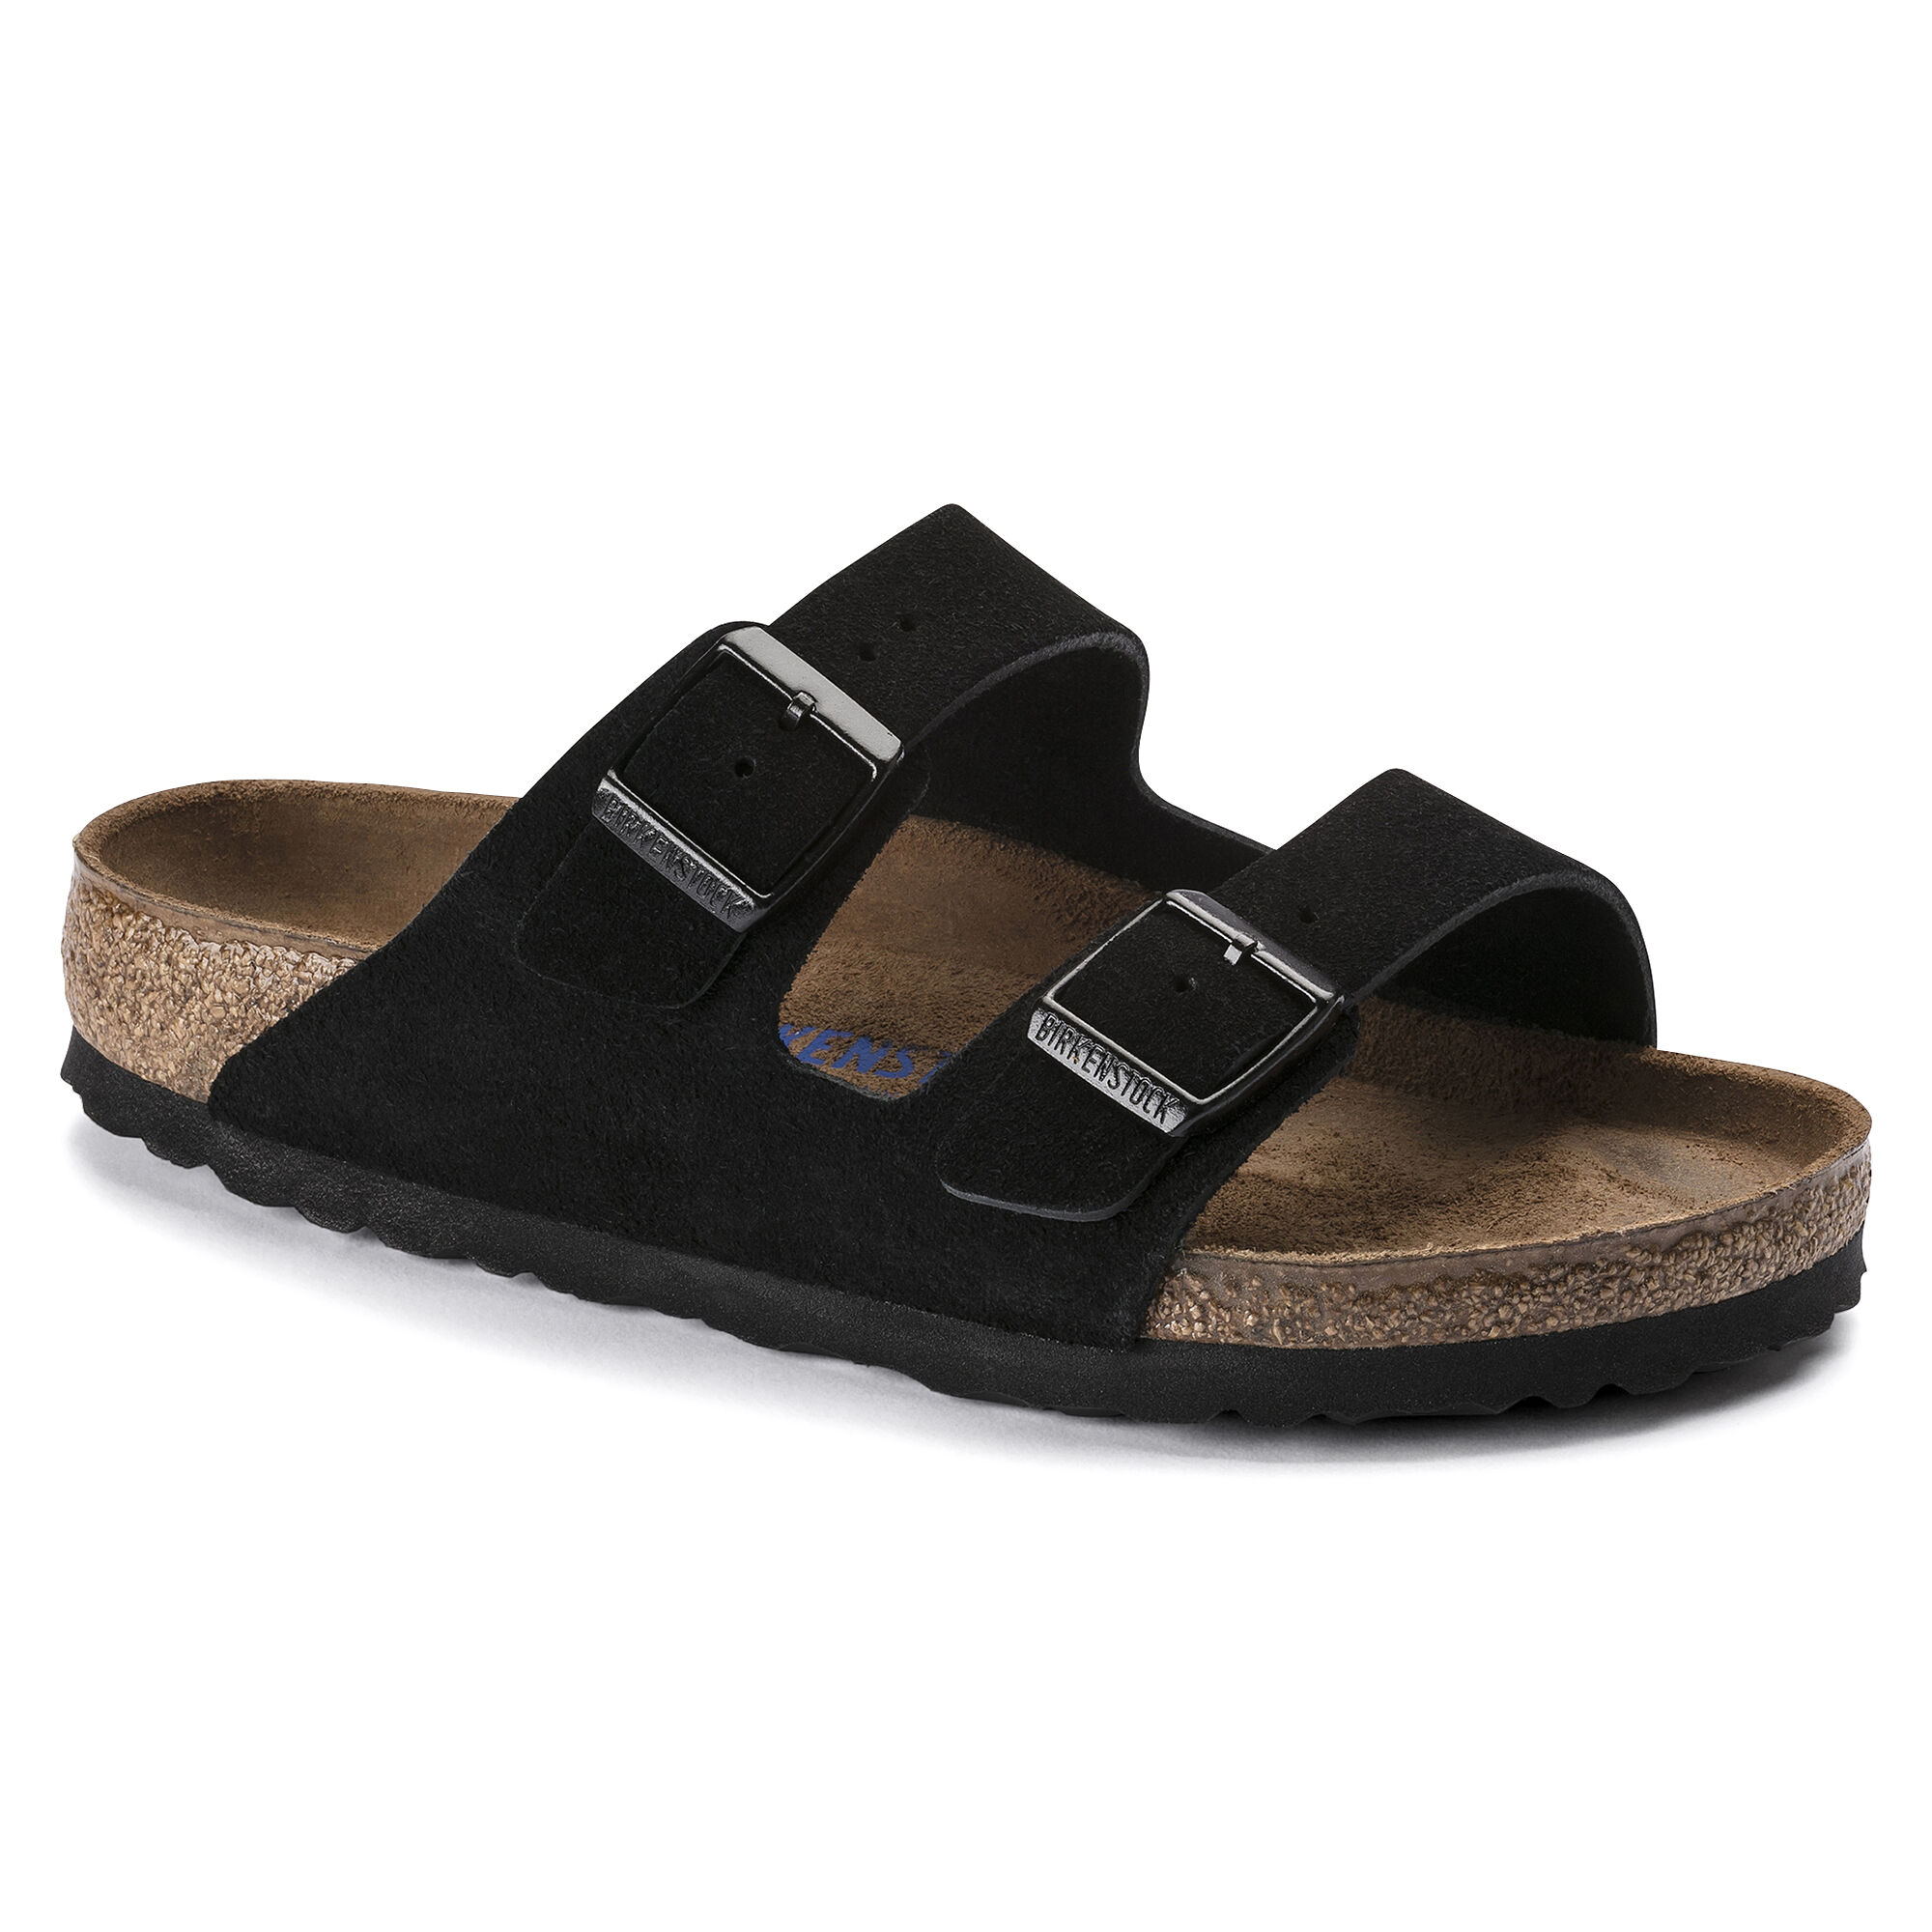 teva leather shoes